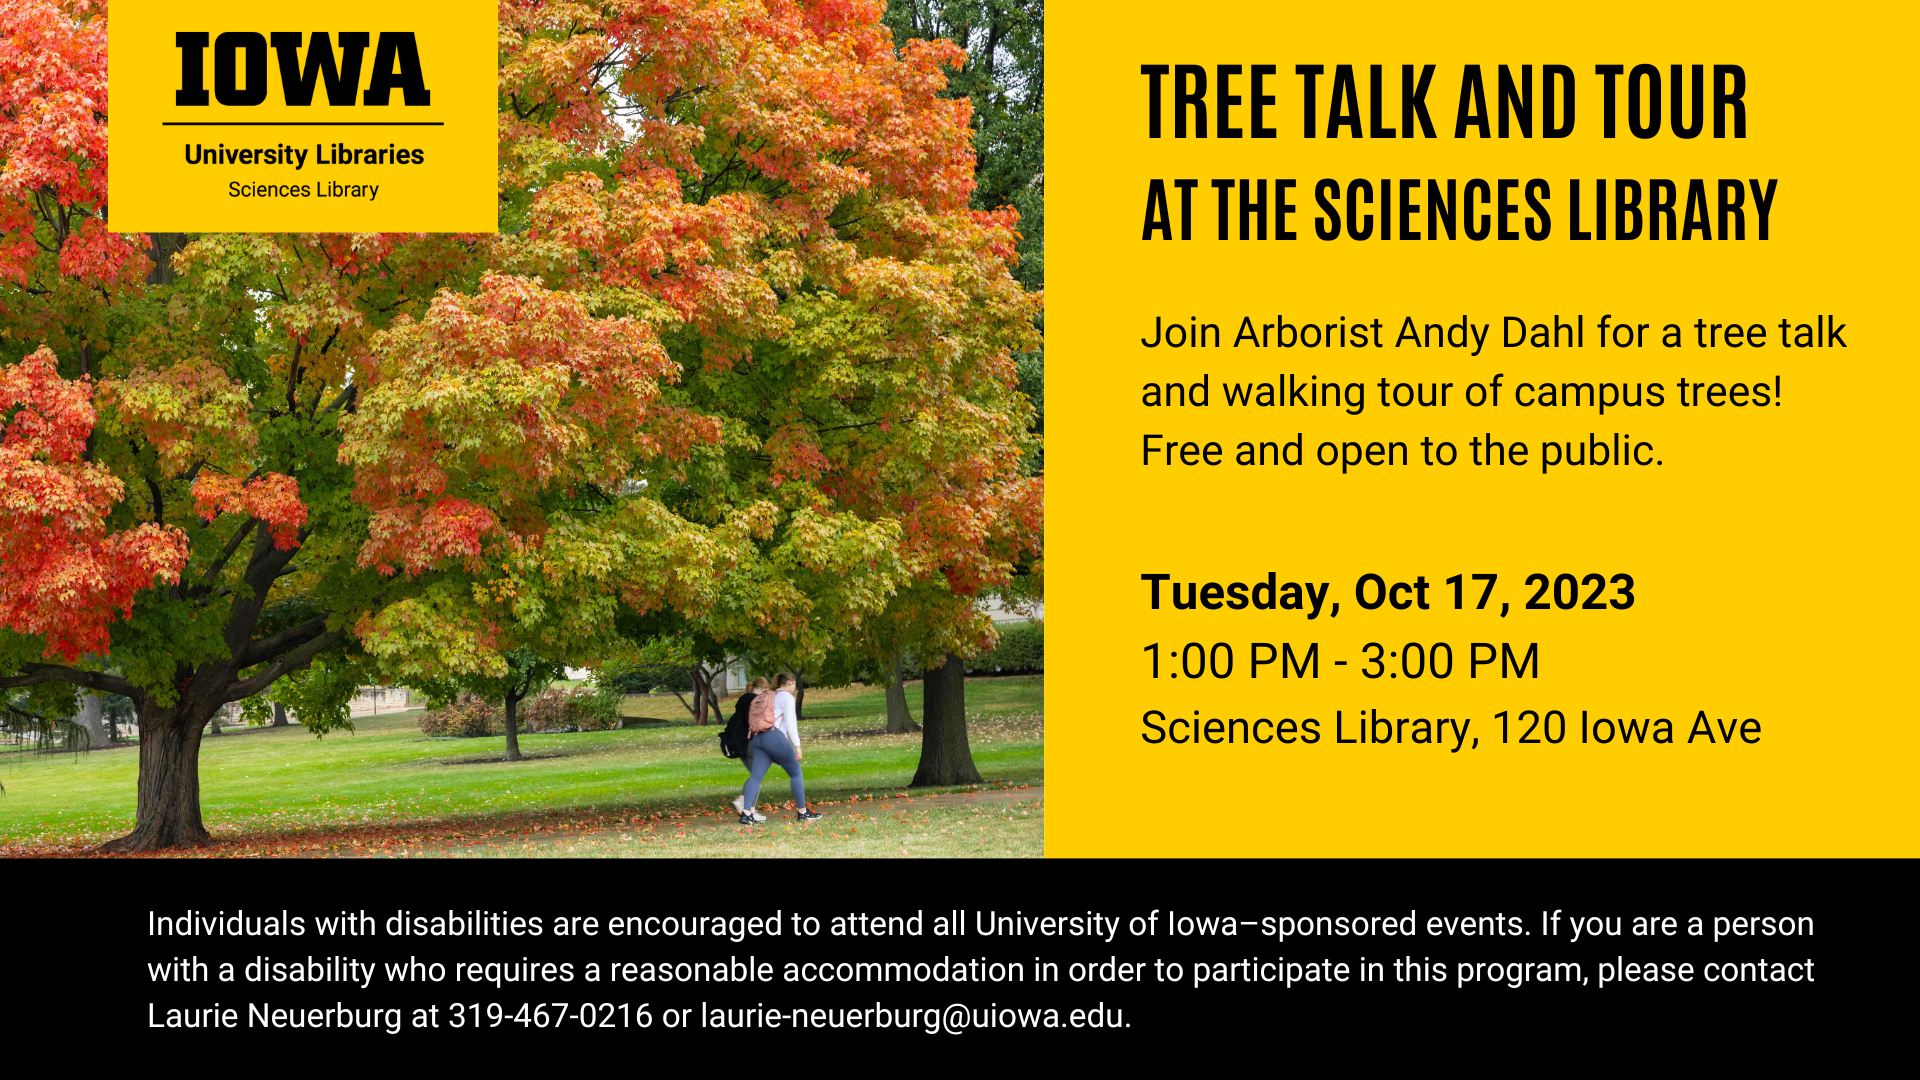 Tree Talk, Tour, and Trivia Competition at the Sciences Library promotional image